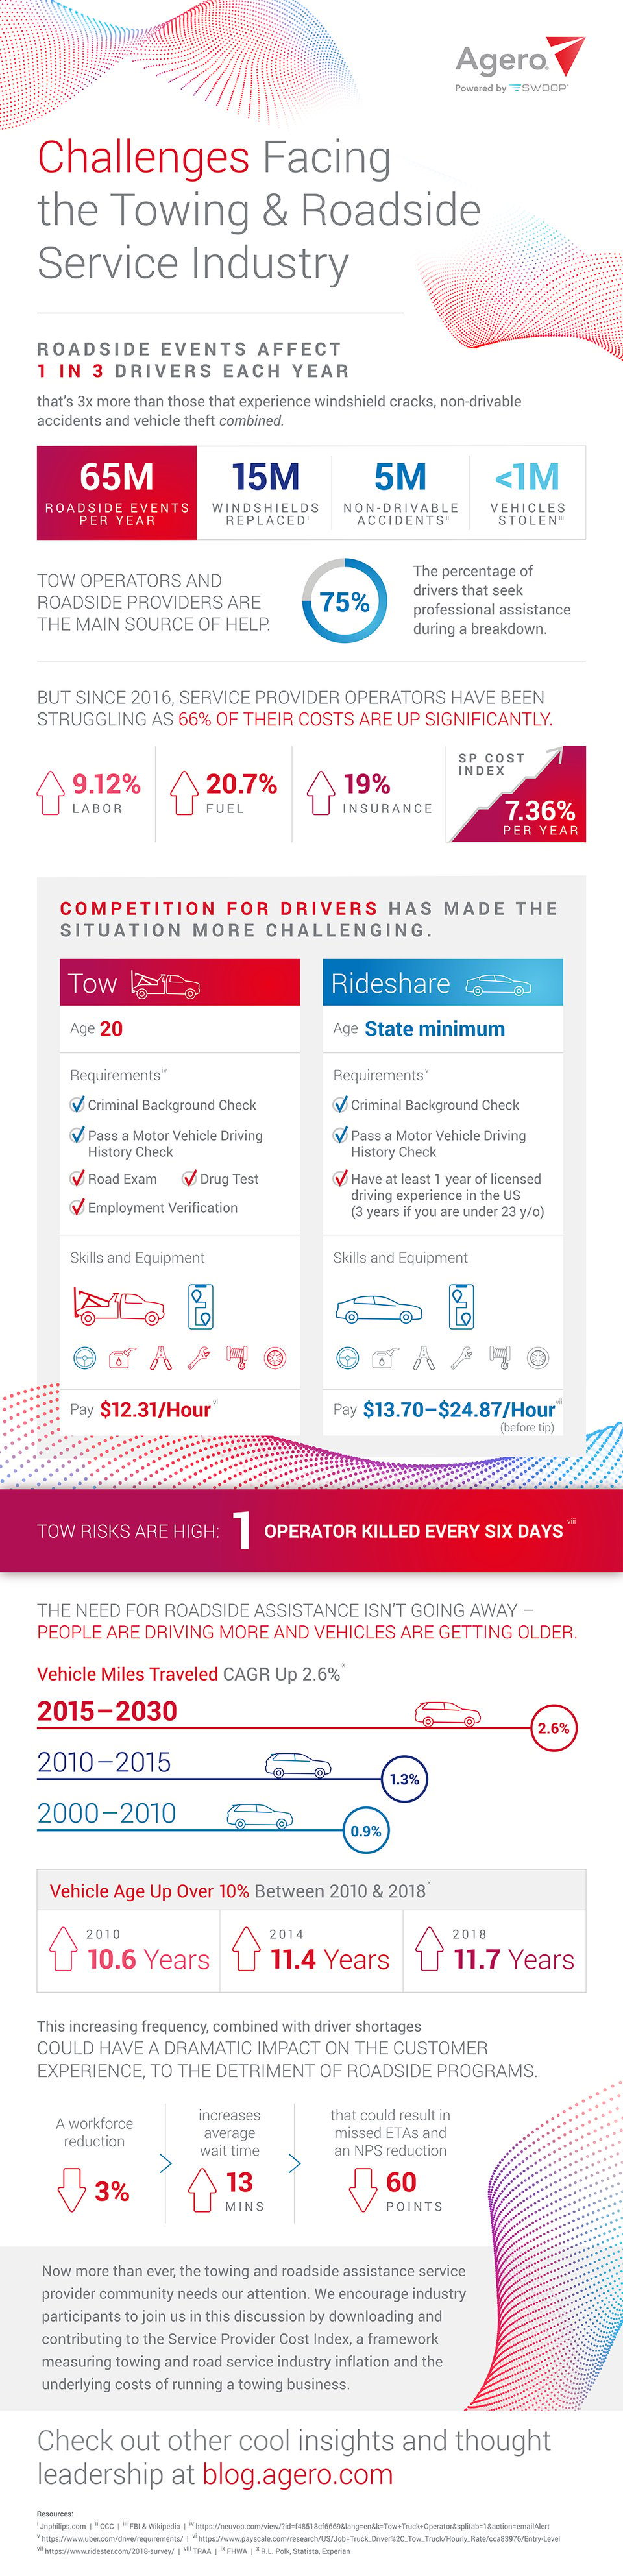 infographic-challenges-road-tow-industry-1100x4550-rebrand-final